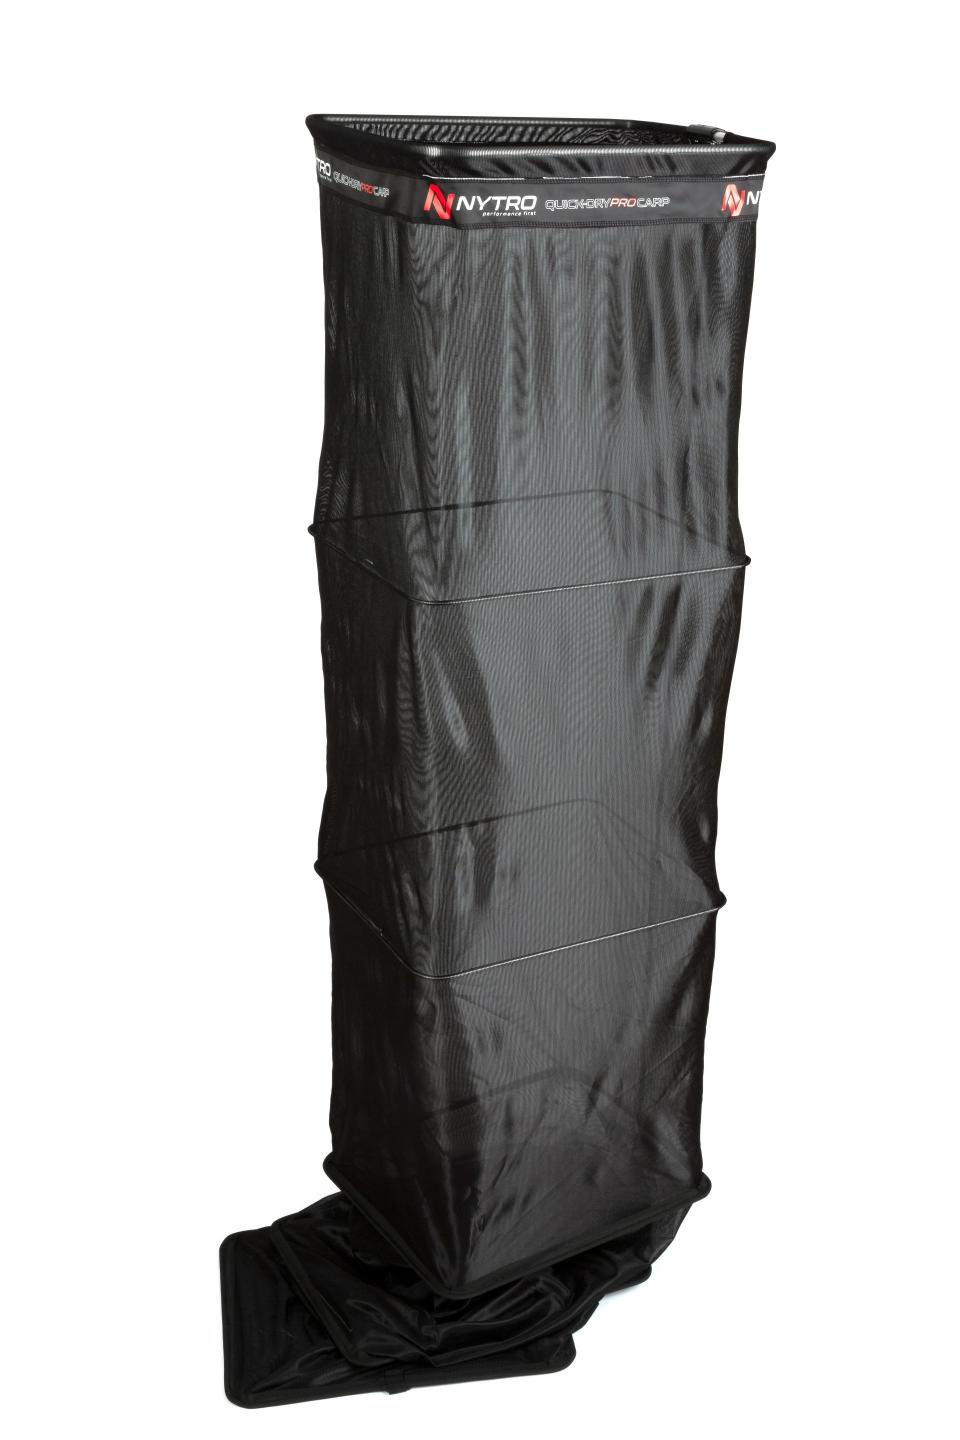 Nytro Commercial Carp 2500 Value Pack (3 Line nets)